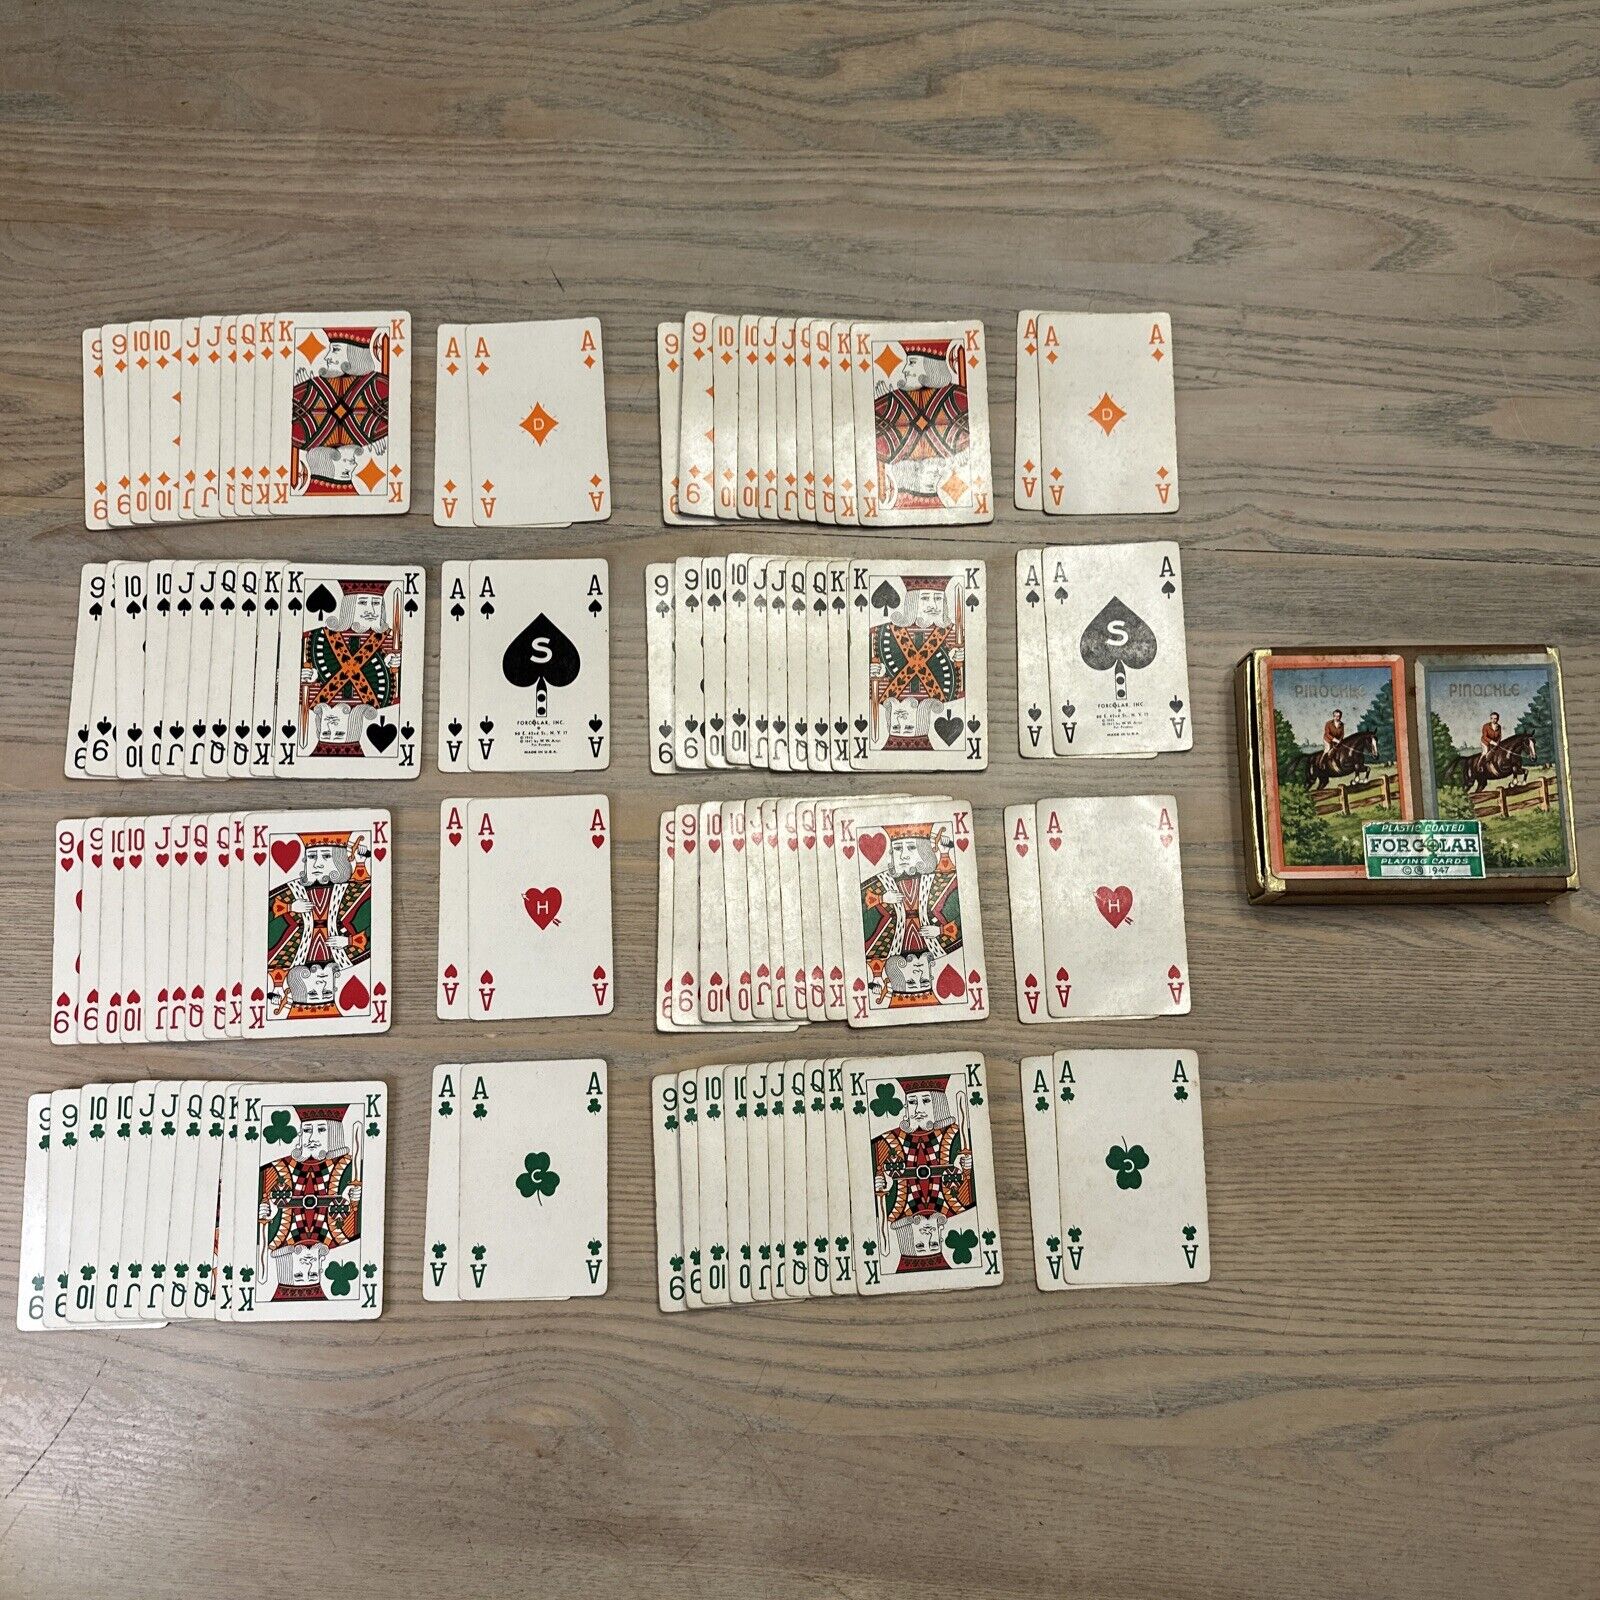 VTG 1947 FORCOLAR Equestrian Double Deck Pinochle Playing Cards Compete Decks